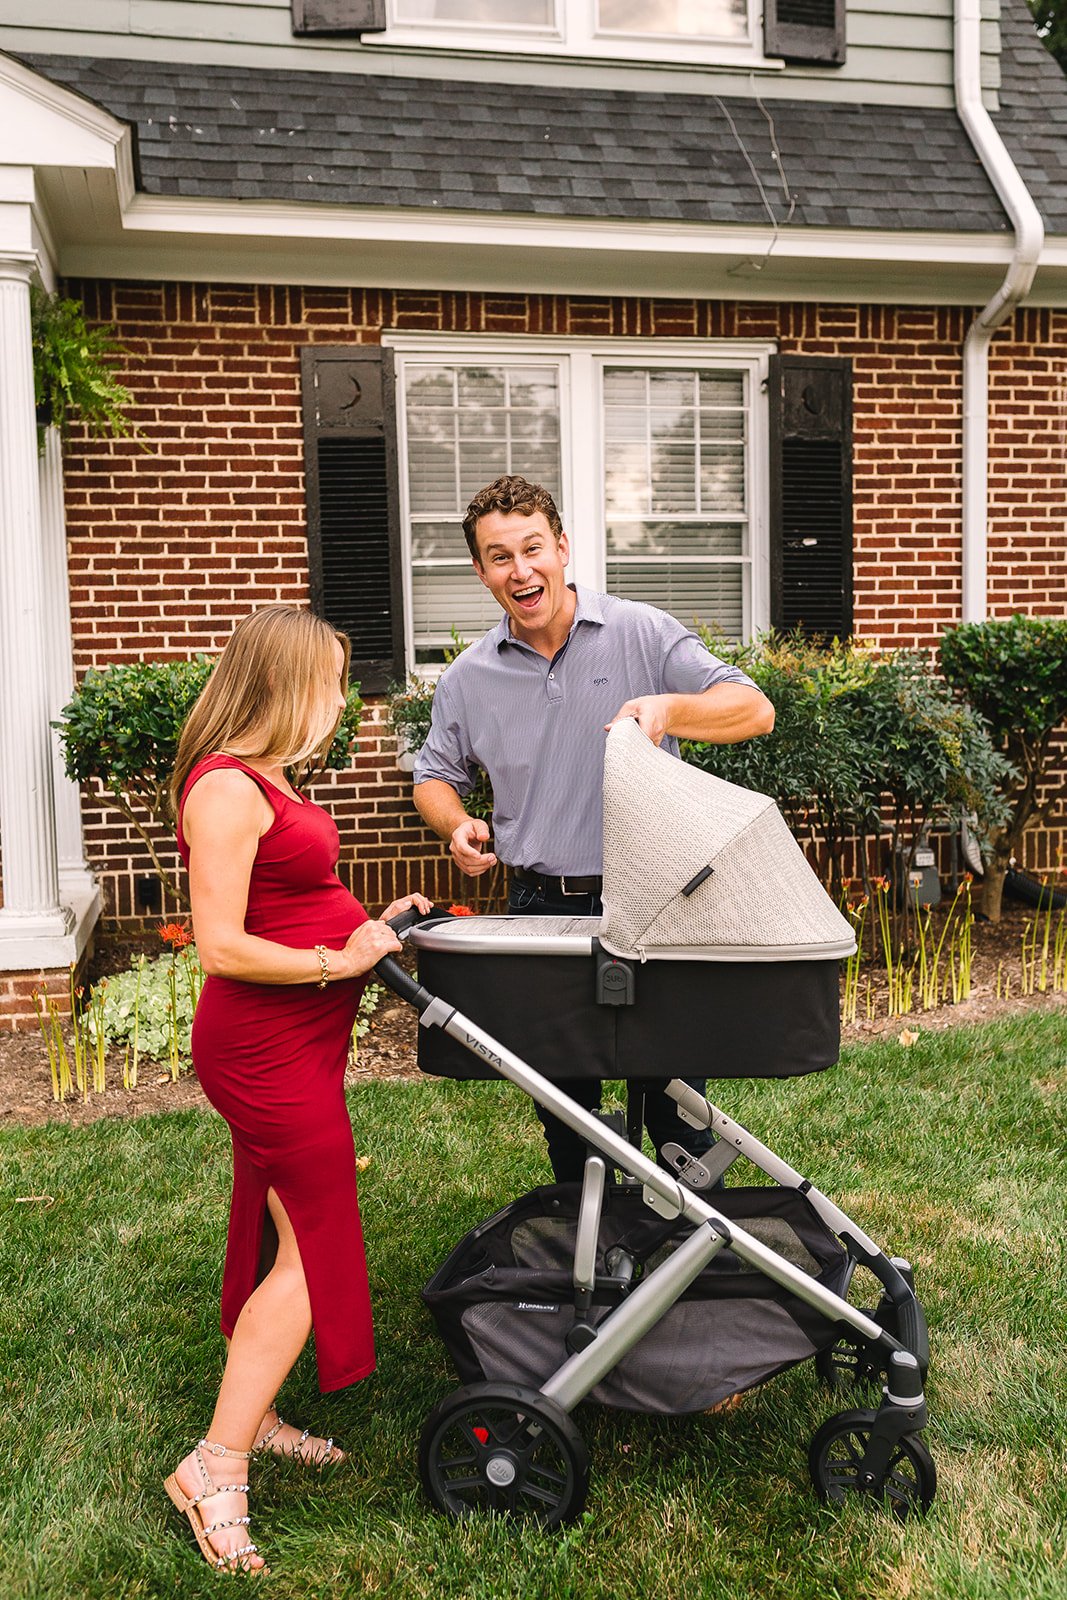 Is the Uppababy Vista Stroller worth it